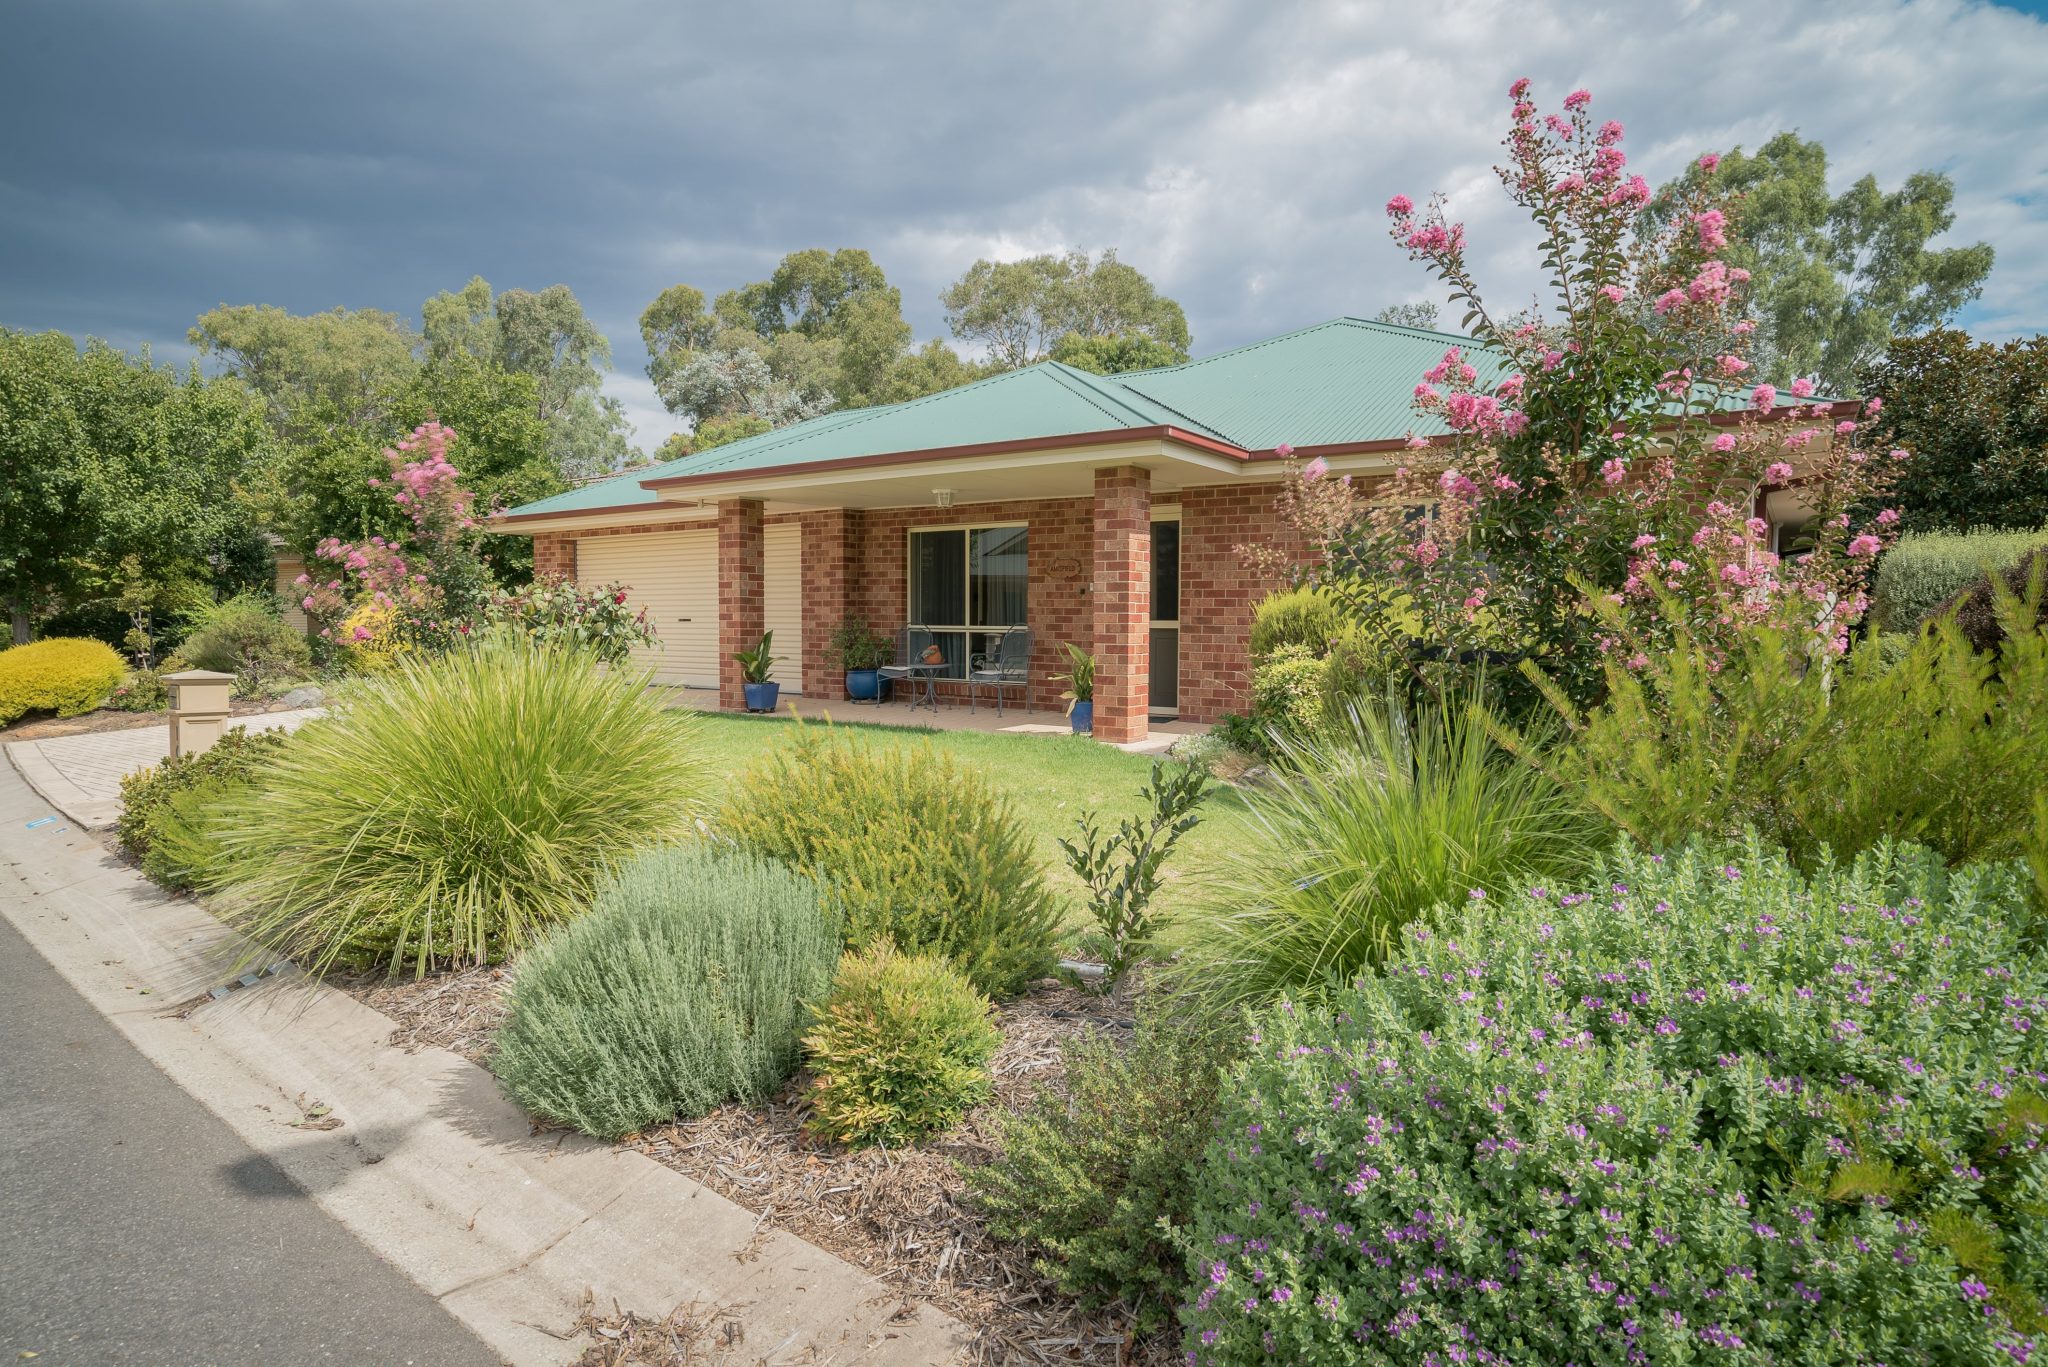 Modern, tidy and independent homes with assisted living at Park Hall Village Wodonga - Wodonga-00633